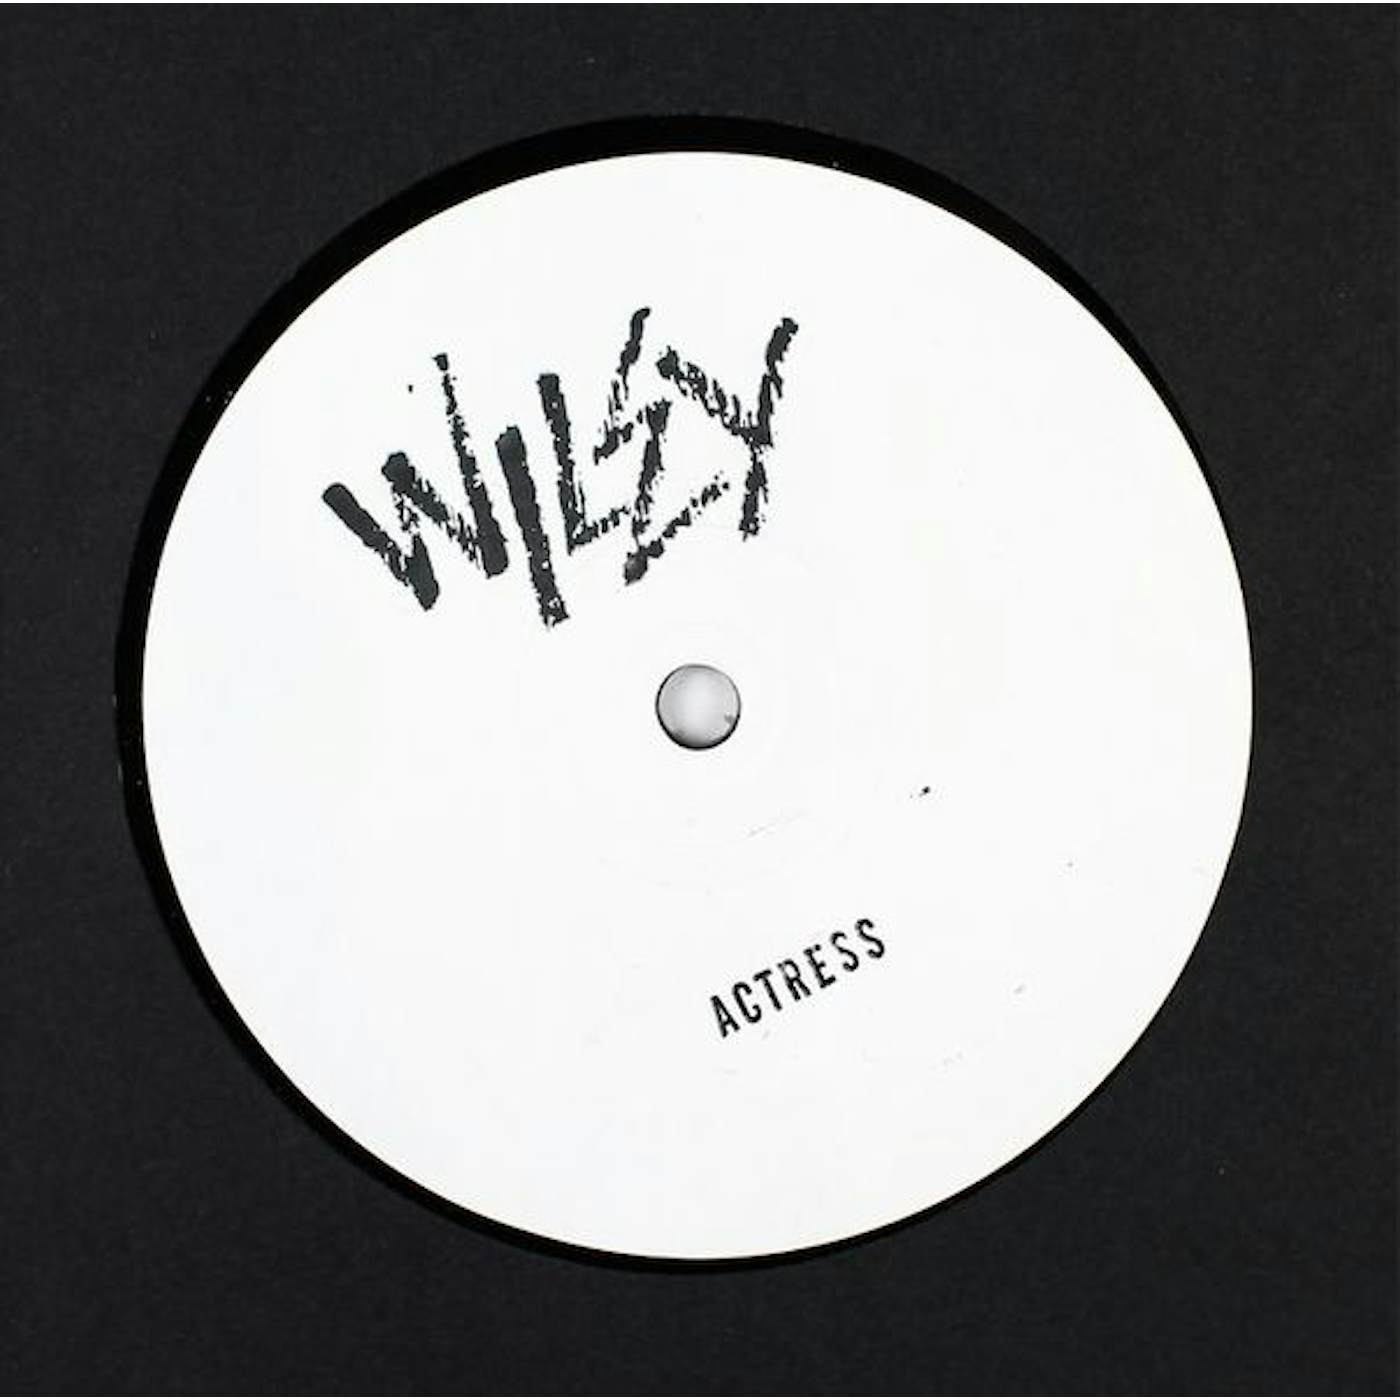 Wiley From The Outside (Actress' Generation 4 Vinyl Record